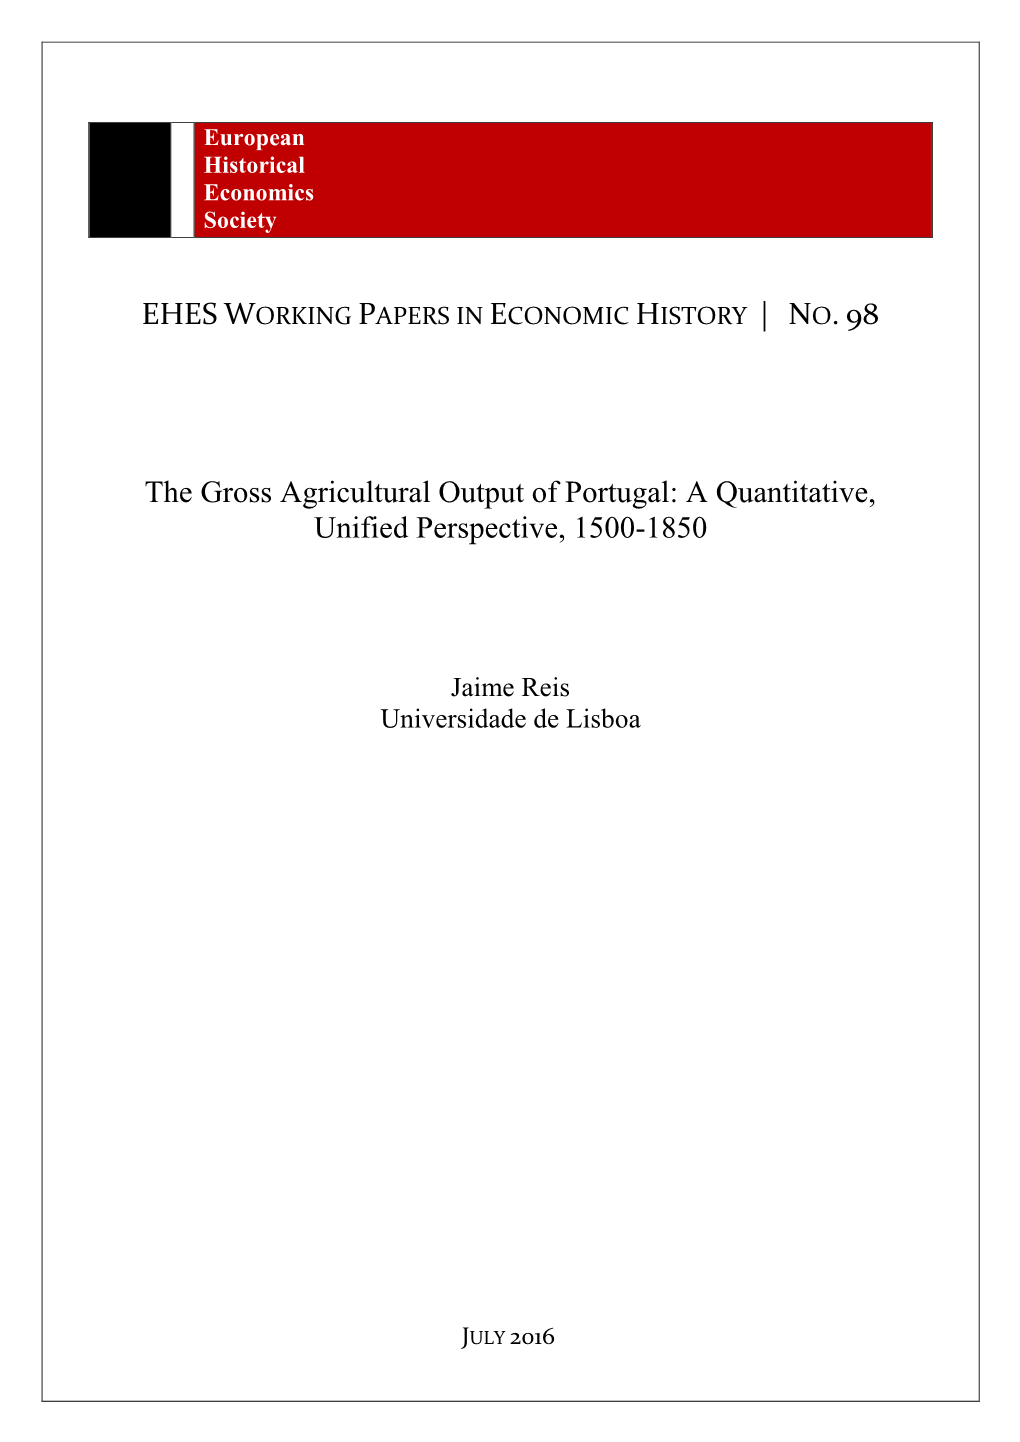 The Gross Agricultural Output of Portugal: a Quantitative, Unified Perspective, 1500-1850